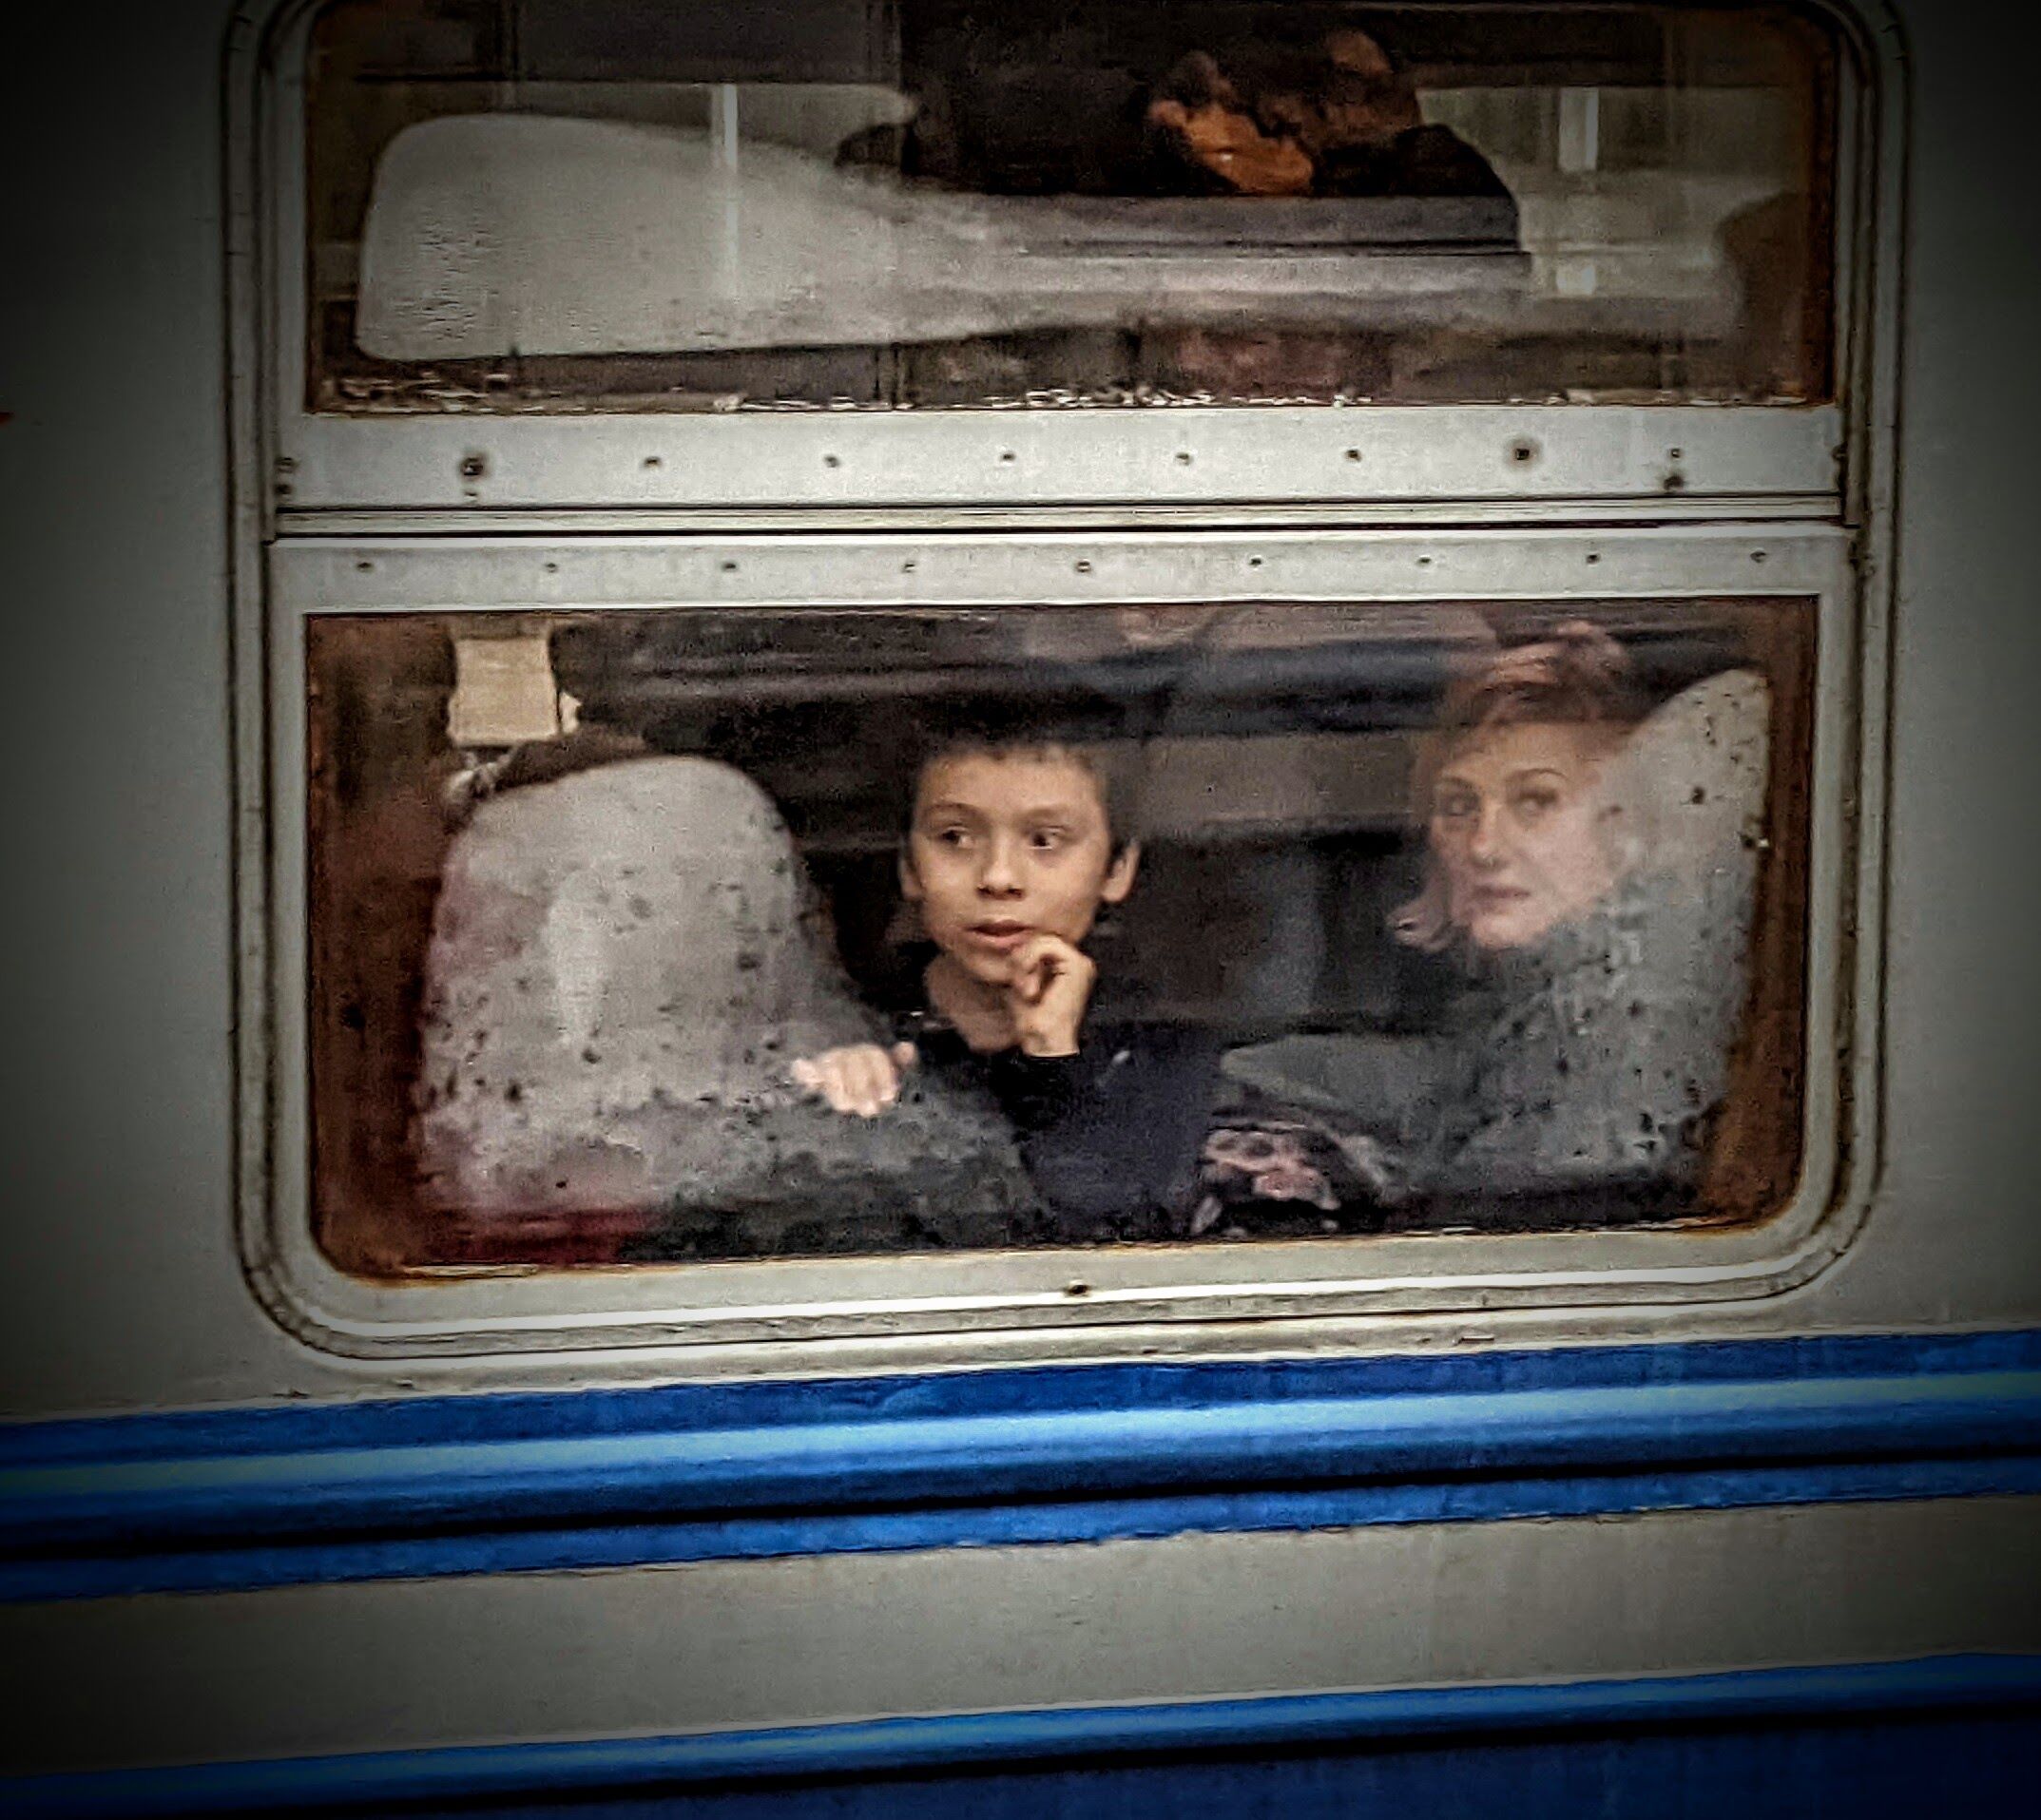 3/5/22: A boy looks out the window on a train that is being held at the Ukrainian - Polish for entry into Poland.